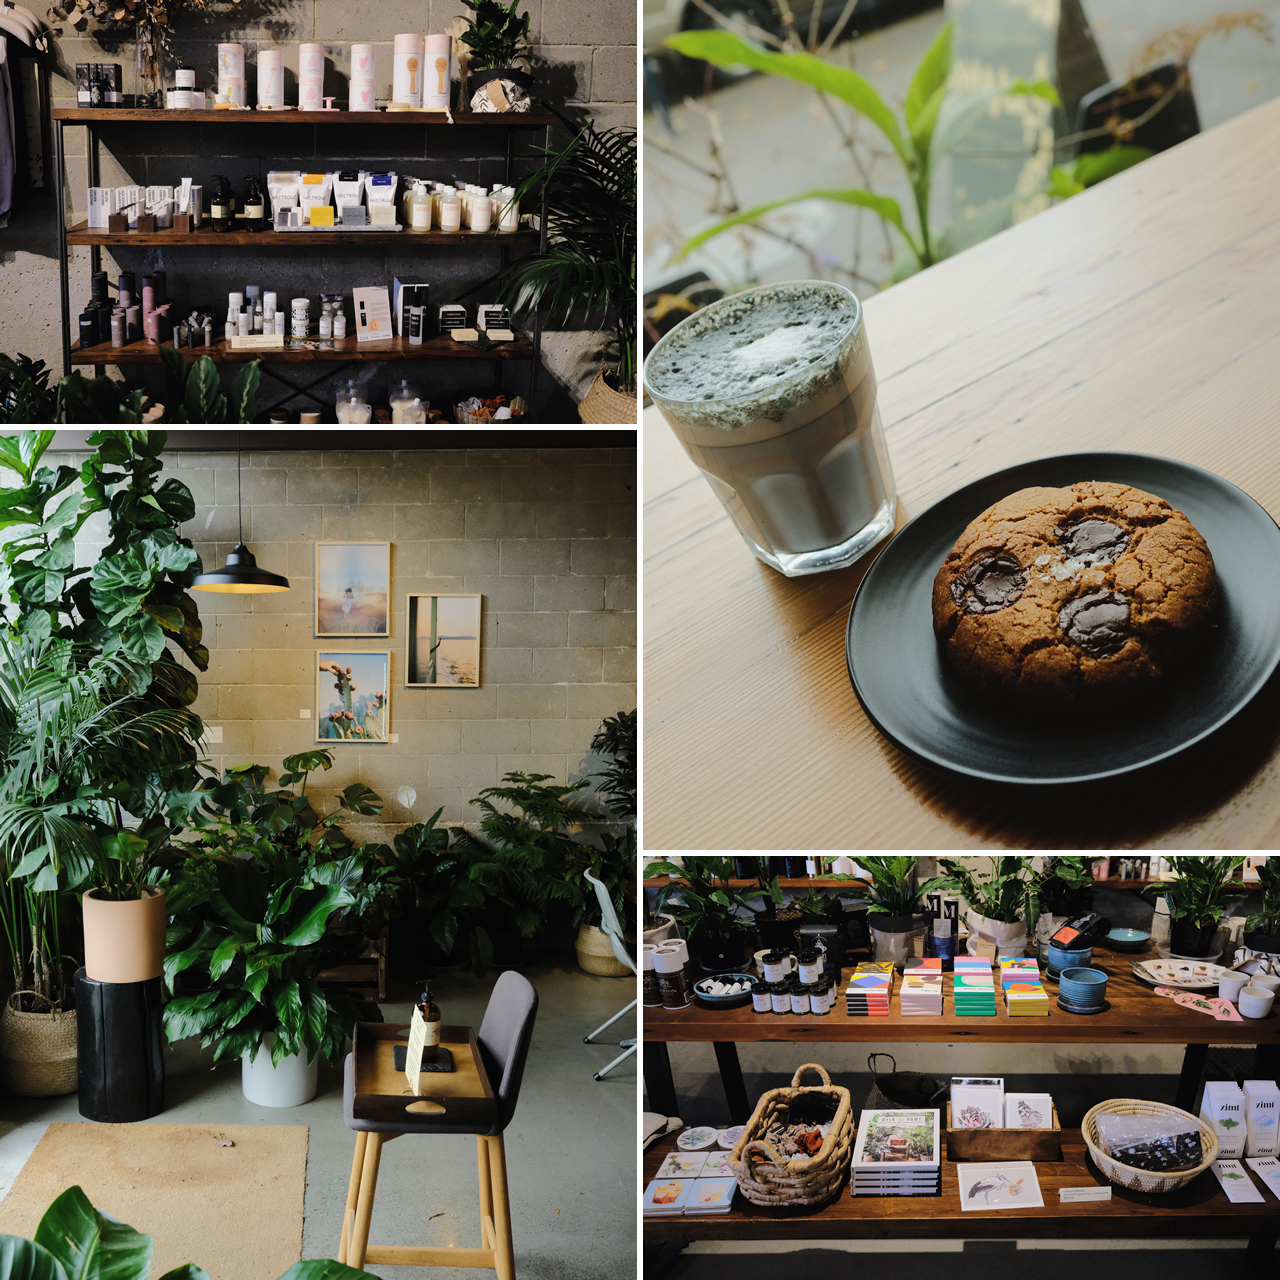 The Garden Strathcona x East Vancouver.
“I found [it] to be a charming spot for a cup of java, snack, or quick meal enhanced by a cozy vibe with a cool industrial warehouse design to its shop and café. It’s a fine place to hide away thanks to its...